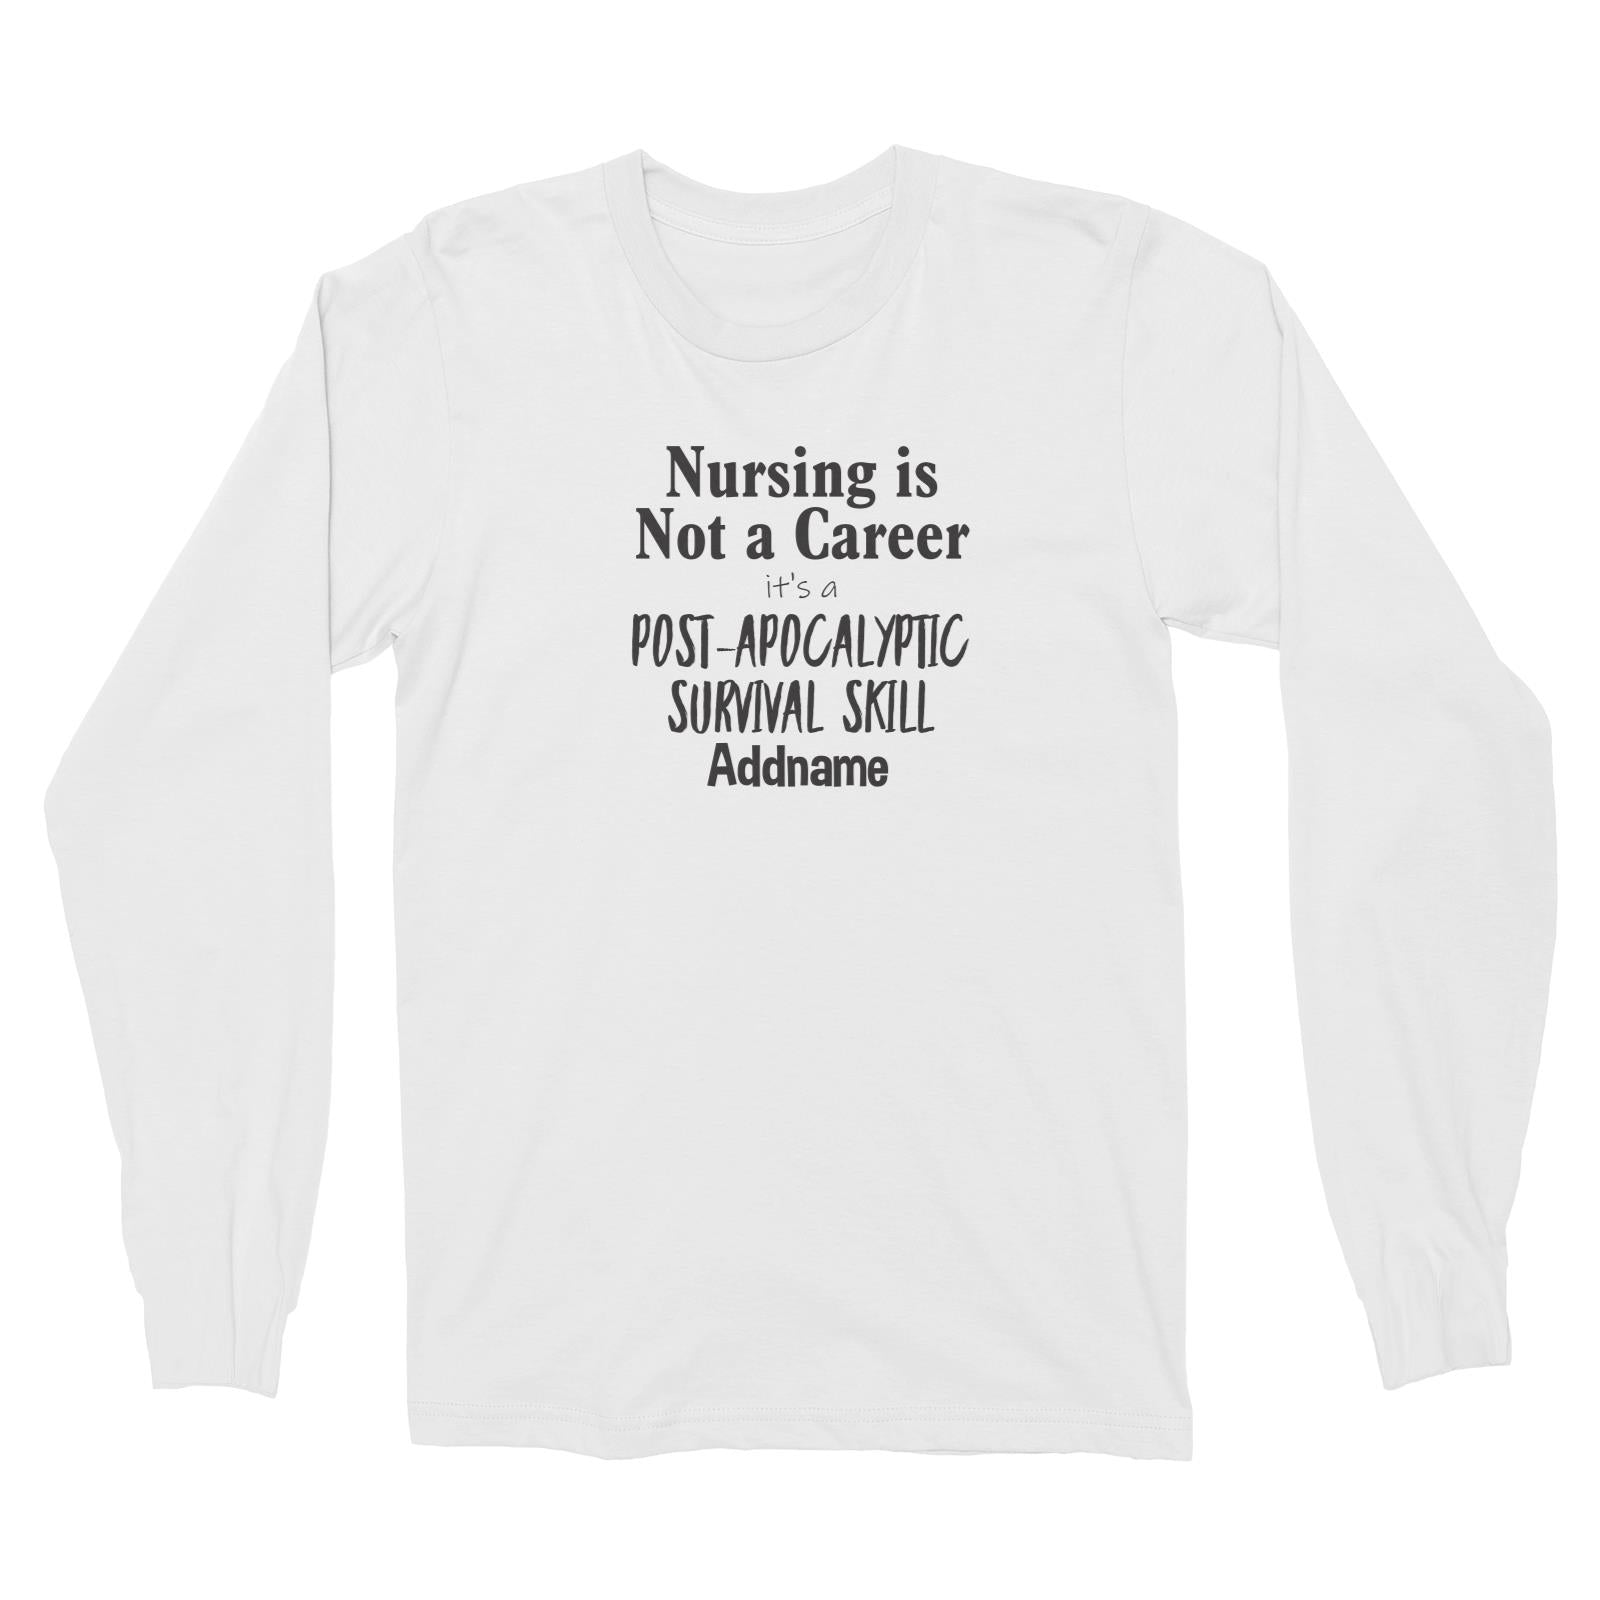 Nursing is Not a Career, It's a Post-Apocalyptic Survival Skill Long Sleeve Unisex T-Shirt